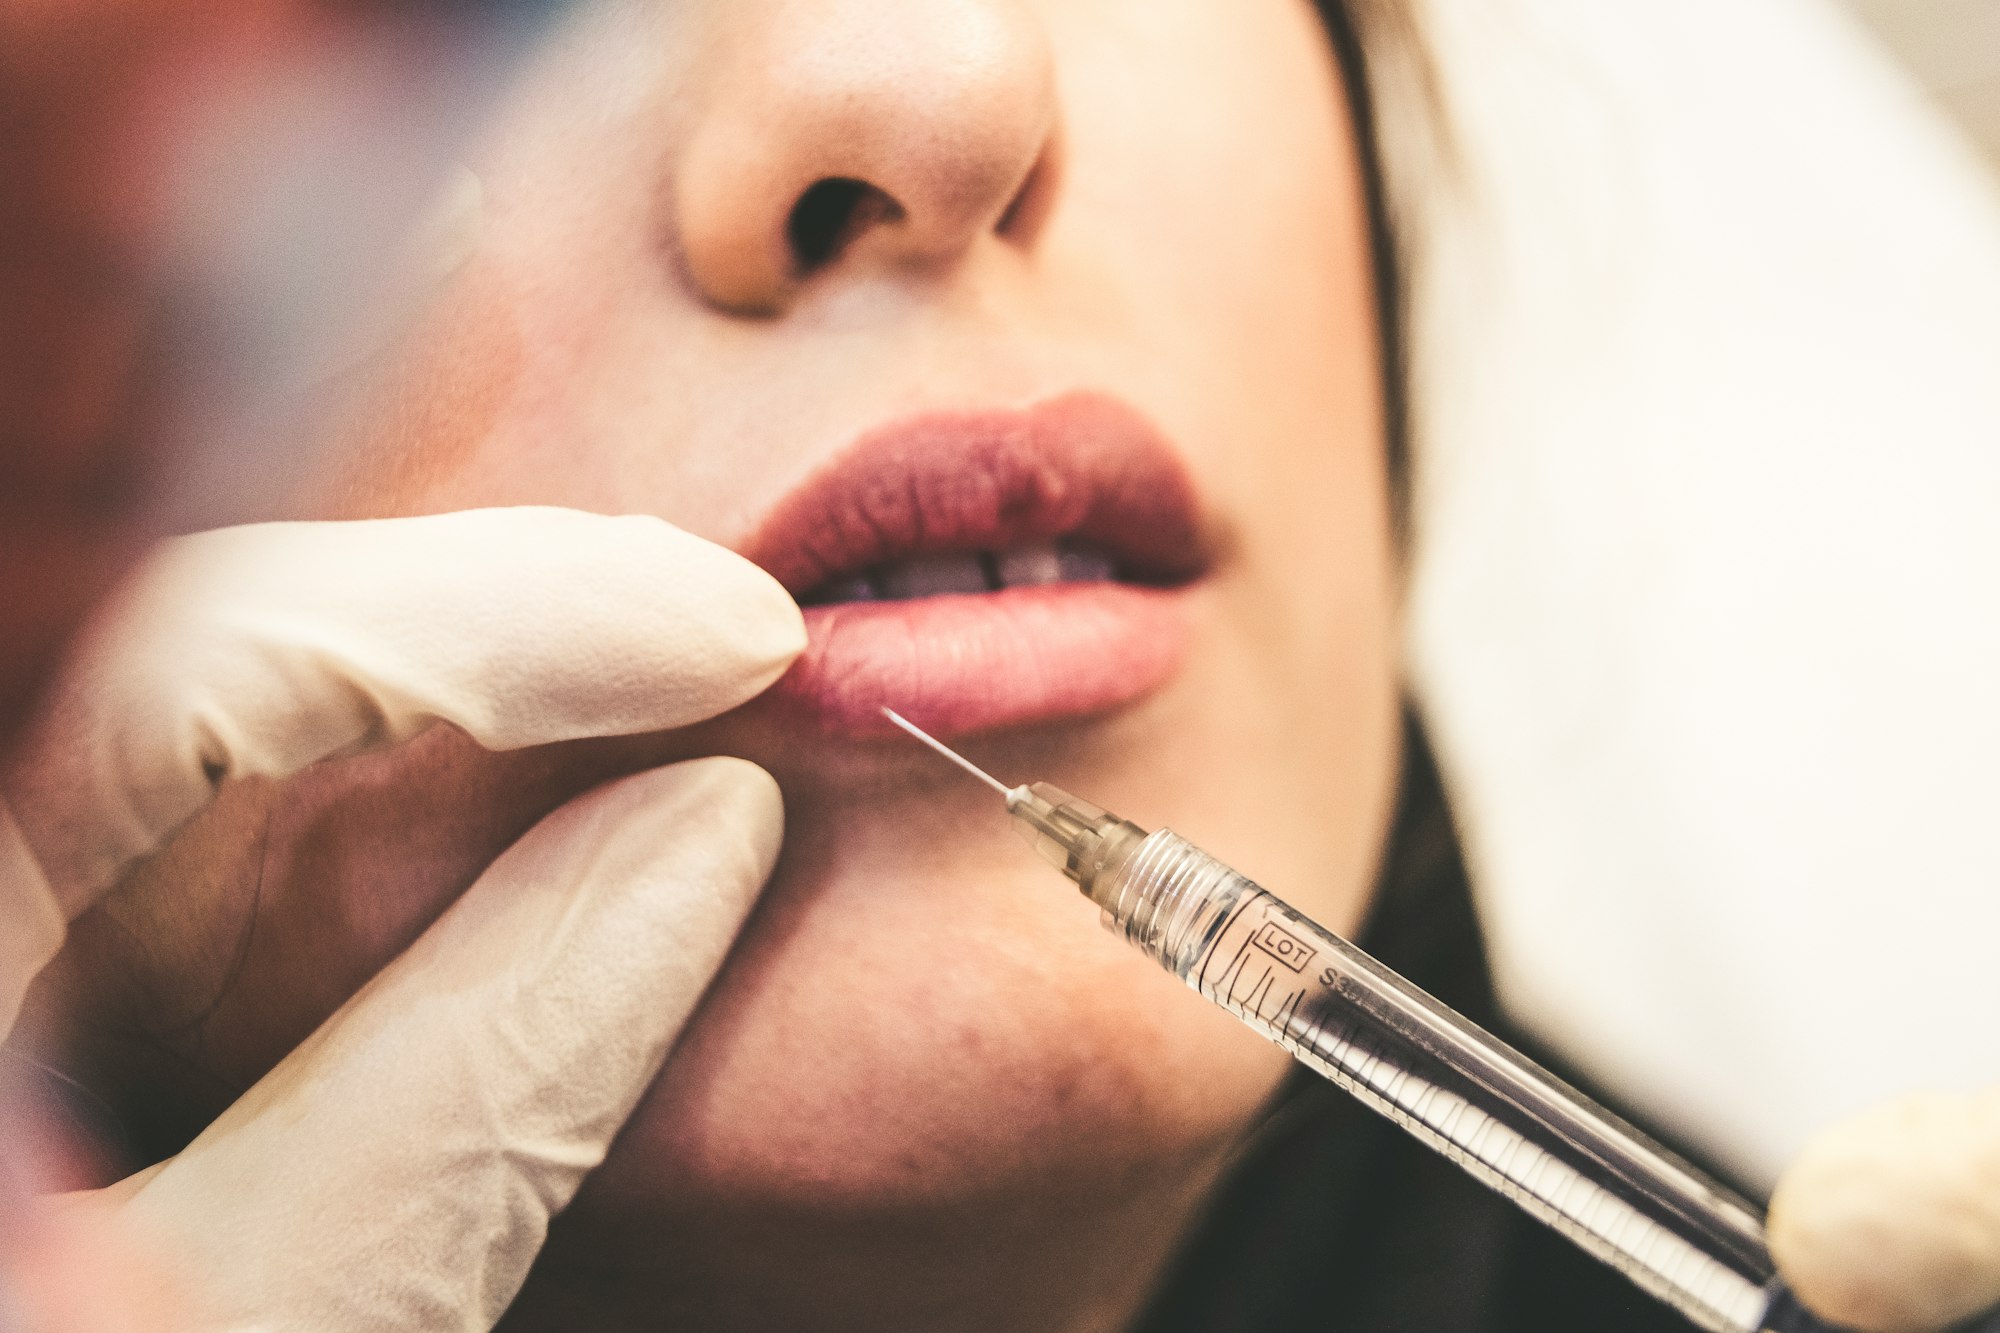 Is cosmetic surgery industry in India safe and regulated?